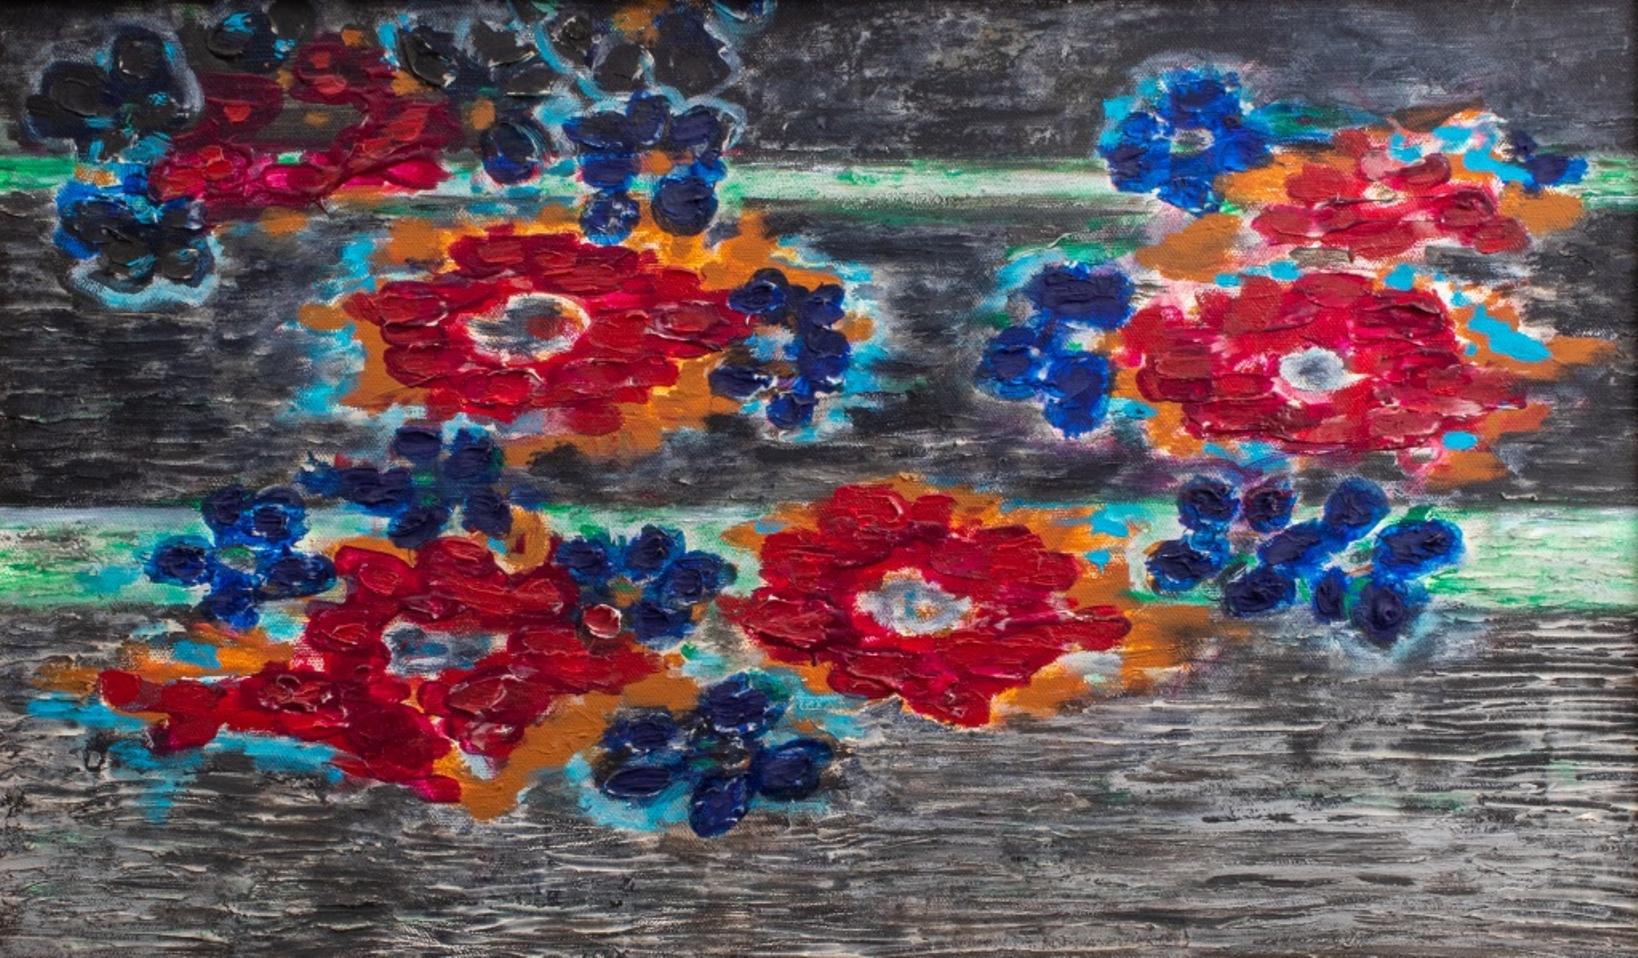 Kayo Lennar (French/American, b. 1923) oil on canvas painting depicting polychrome flowers on an abstracted ground, apparently unsigned, housed in an ebonized and gilt wood frame. Image: 11.5